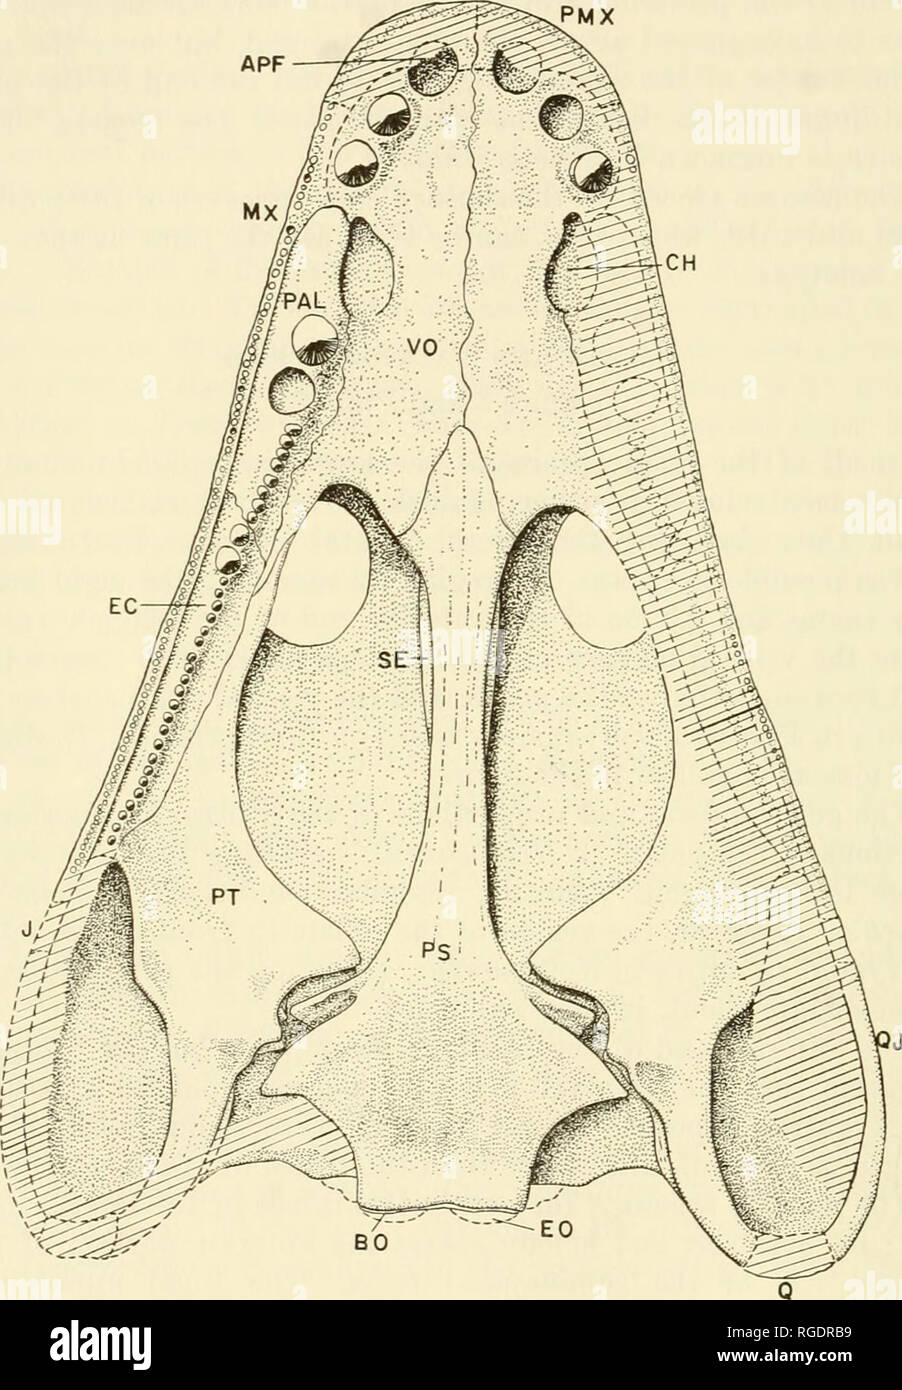 . Bulletin of the Museum of Comparative Zoology at Harvard College. Zoology. 170 BULLETIN : MUSEUM OF COMPARATIVE ZOOLOGY. Fig. 3. Reconstruction of skull of Neldasaurus wrightae in palatal as- pect, X -75. Eestored areas are hatched. Abbreviations: APF, anterior palatal fenestra; BO, basioccipital; CH, choana; EC, ectopterygoid; EO, exoccipital; J, jugal; MX, maxilla; PAL, palatine; PMX, premaxilla; PS, parasphenoid; PT, pterygoid; Q, quadrate; QJ, quadratojugal; SE, sphen- ethmoid; VO, vomer.. Please note that these images are extracted from scanned page images that may have been digitally e Stock Photo